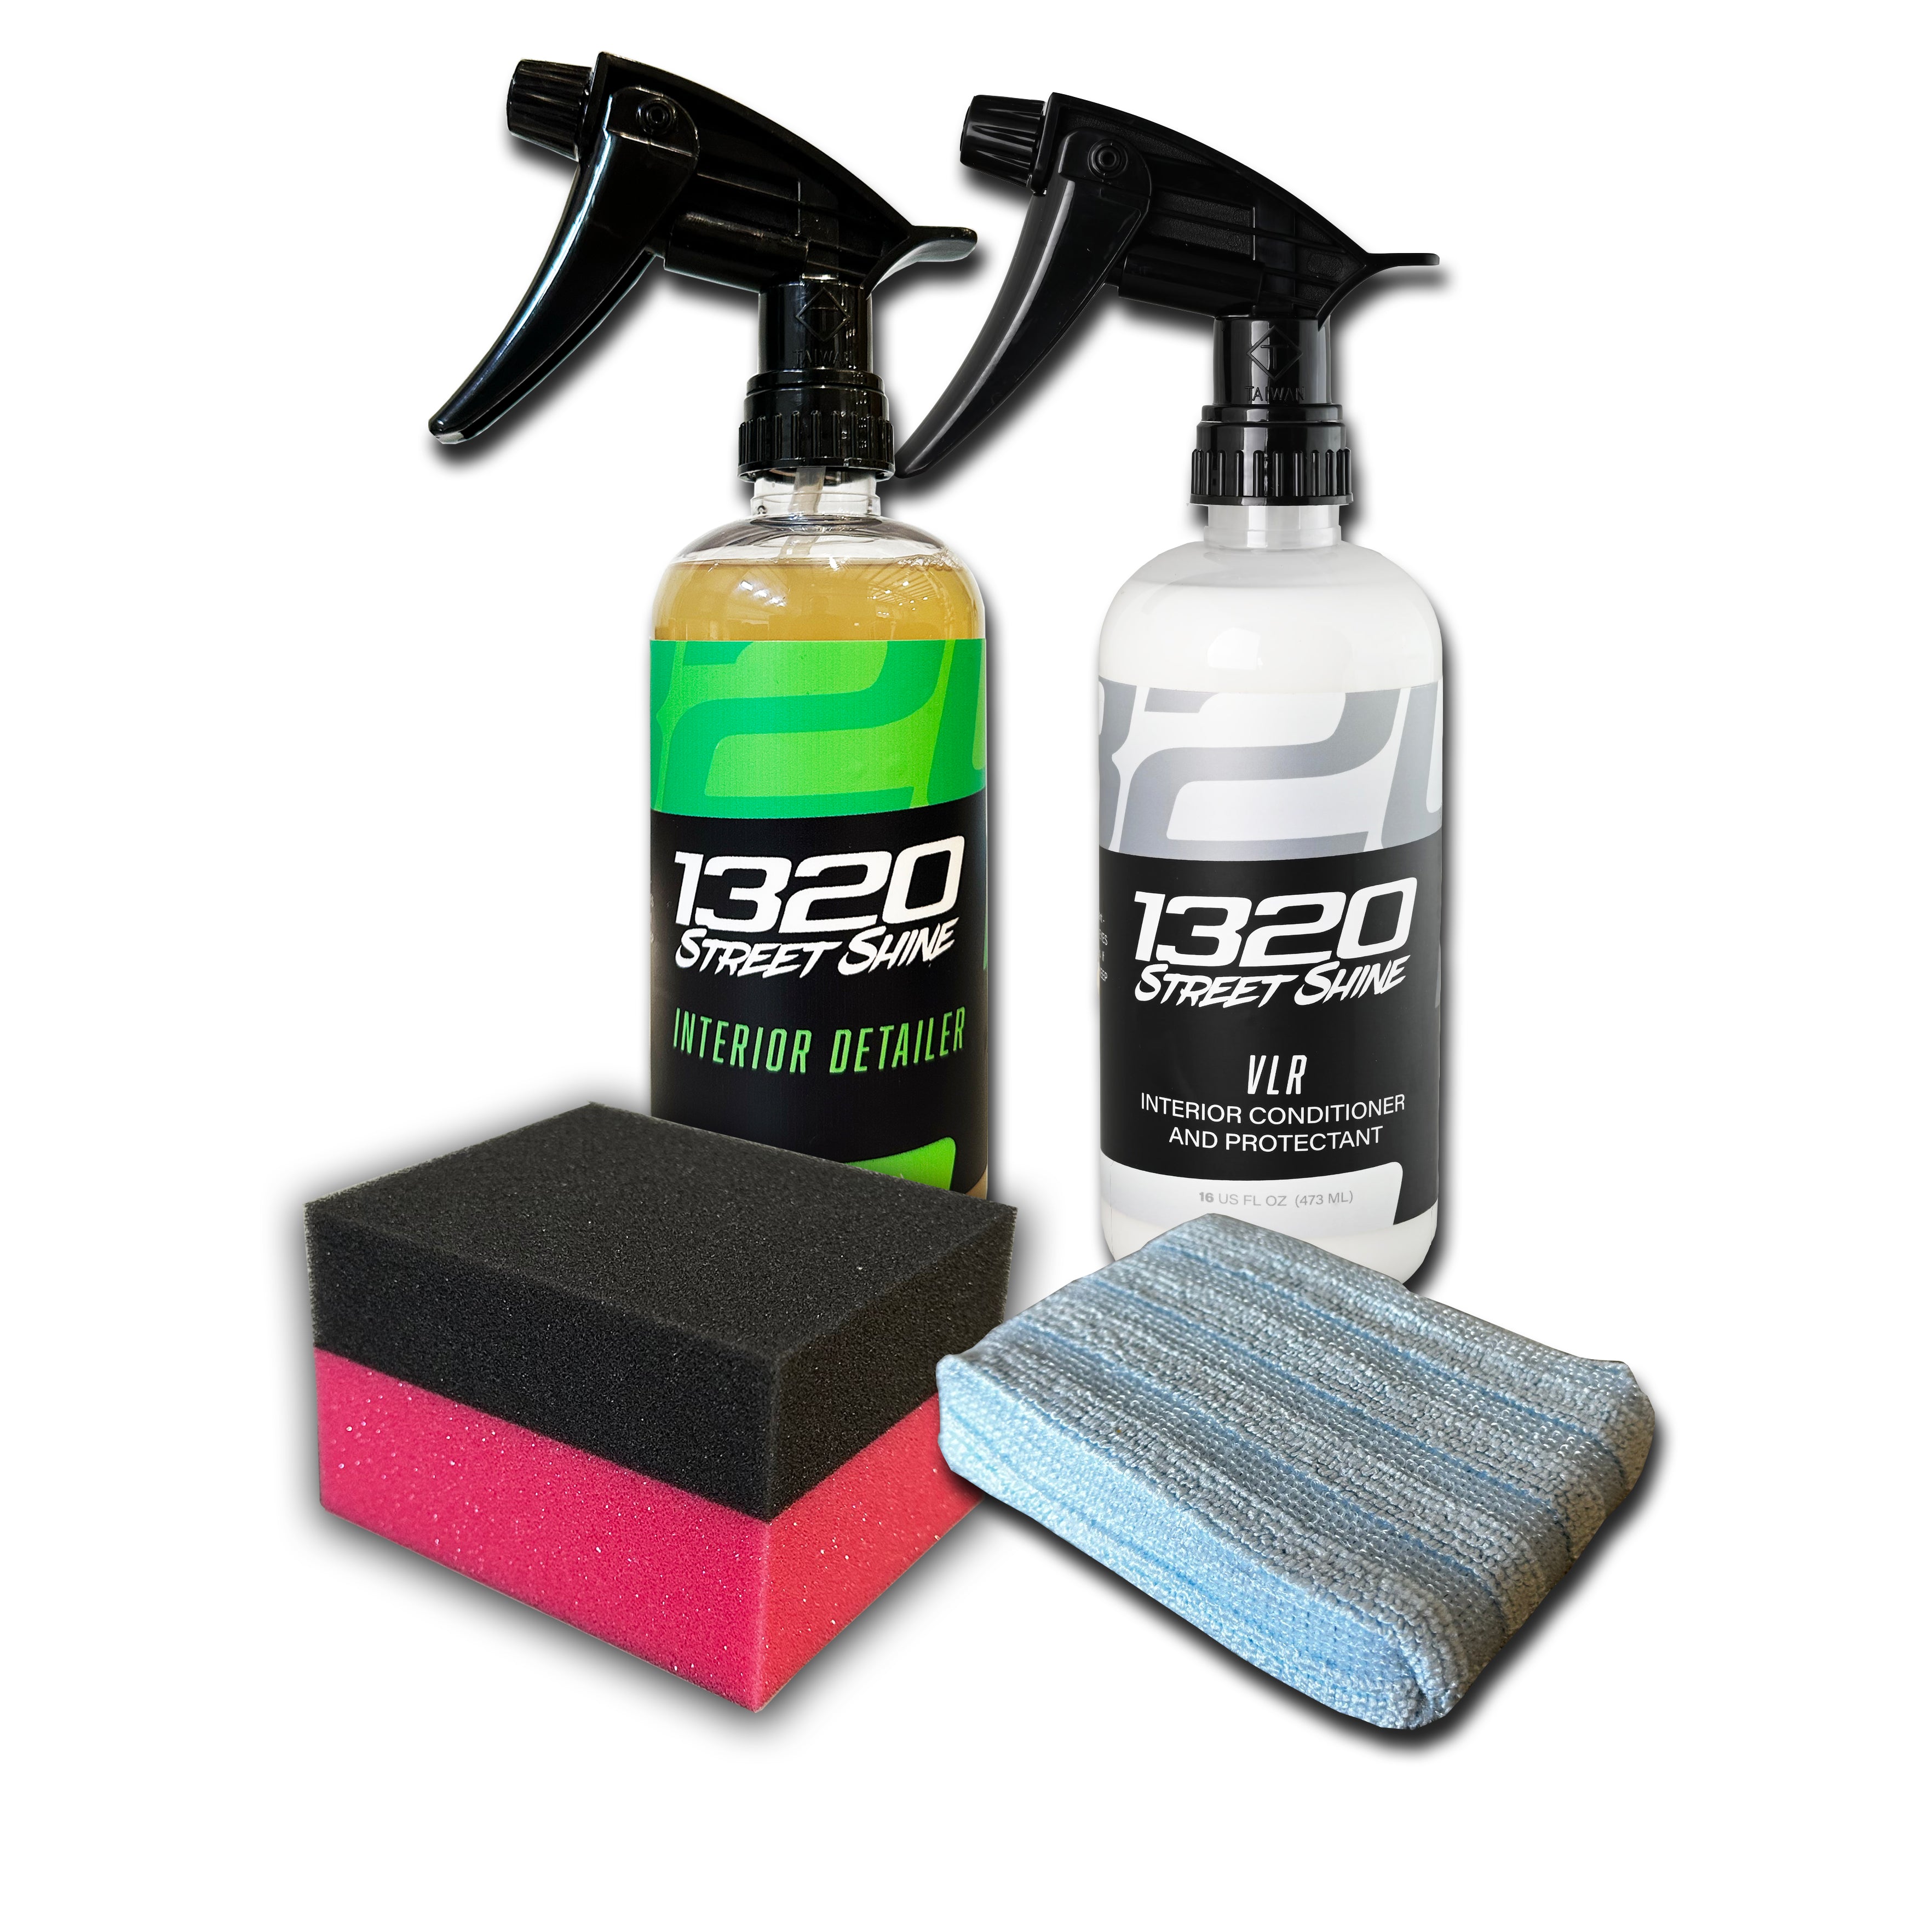 Home Wash Kit - 1320Video